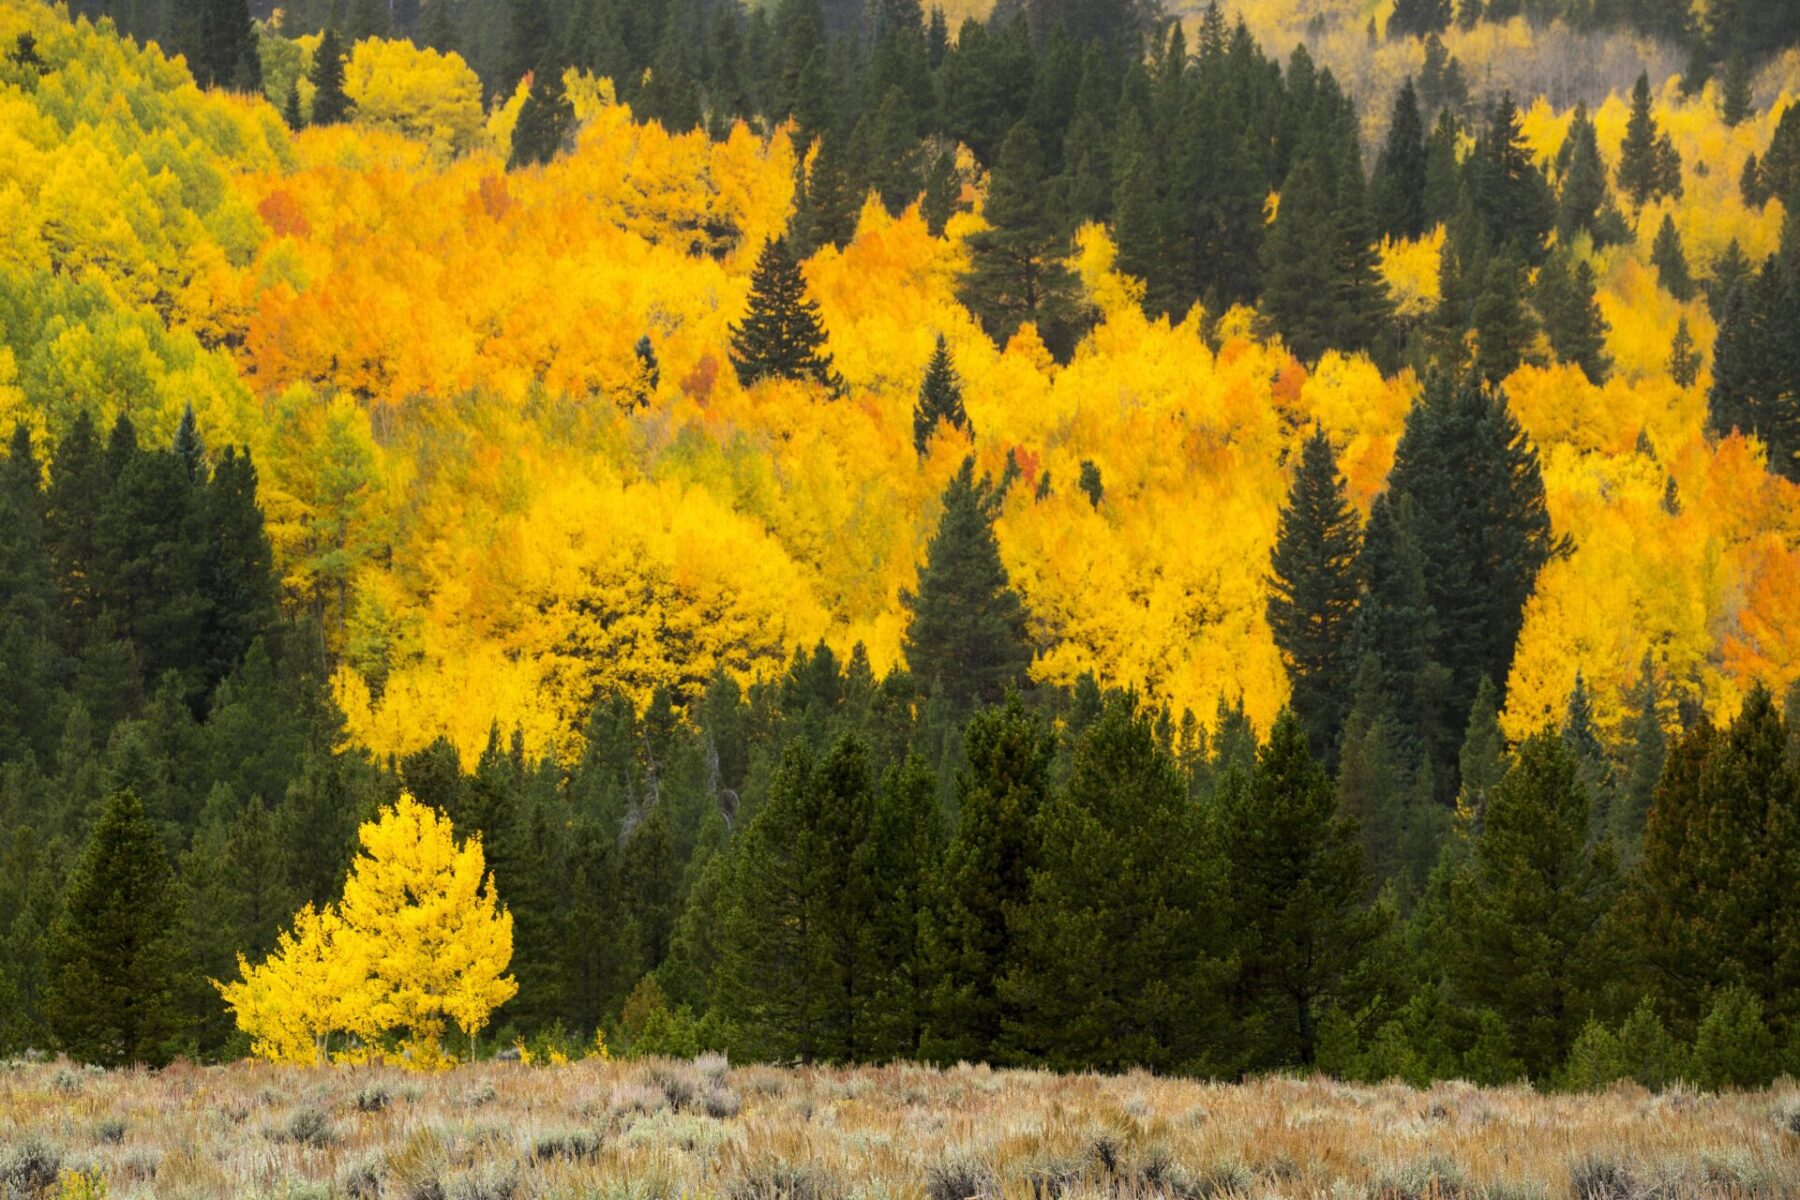 quaking aspen flaming forests of fall images on quaking aspen trees leaves forest wallpapers